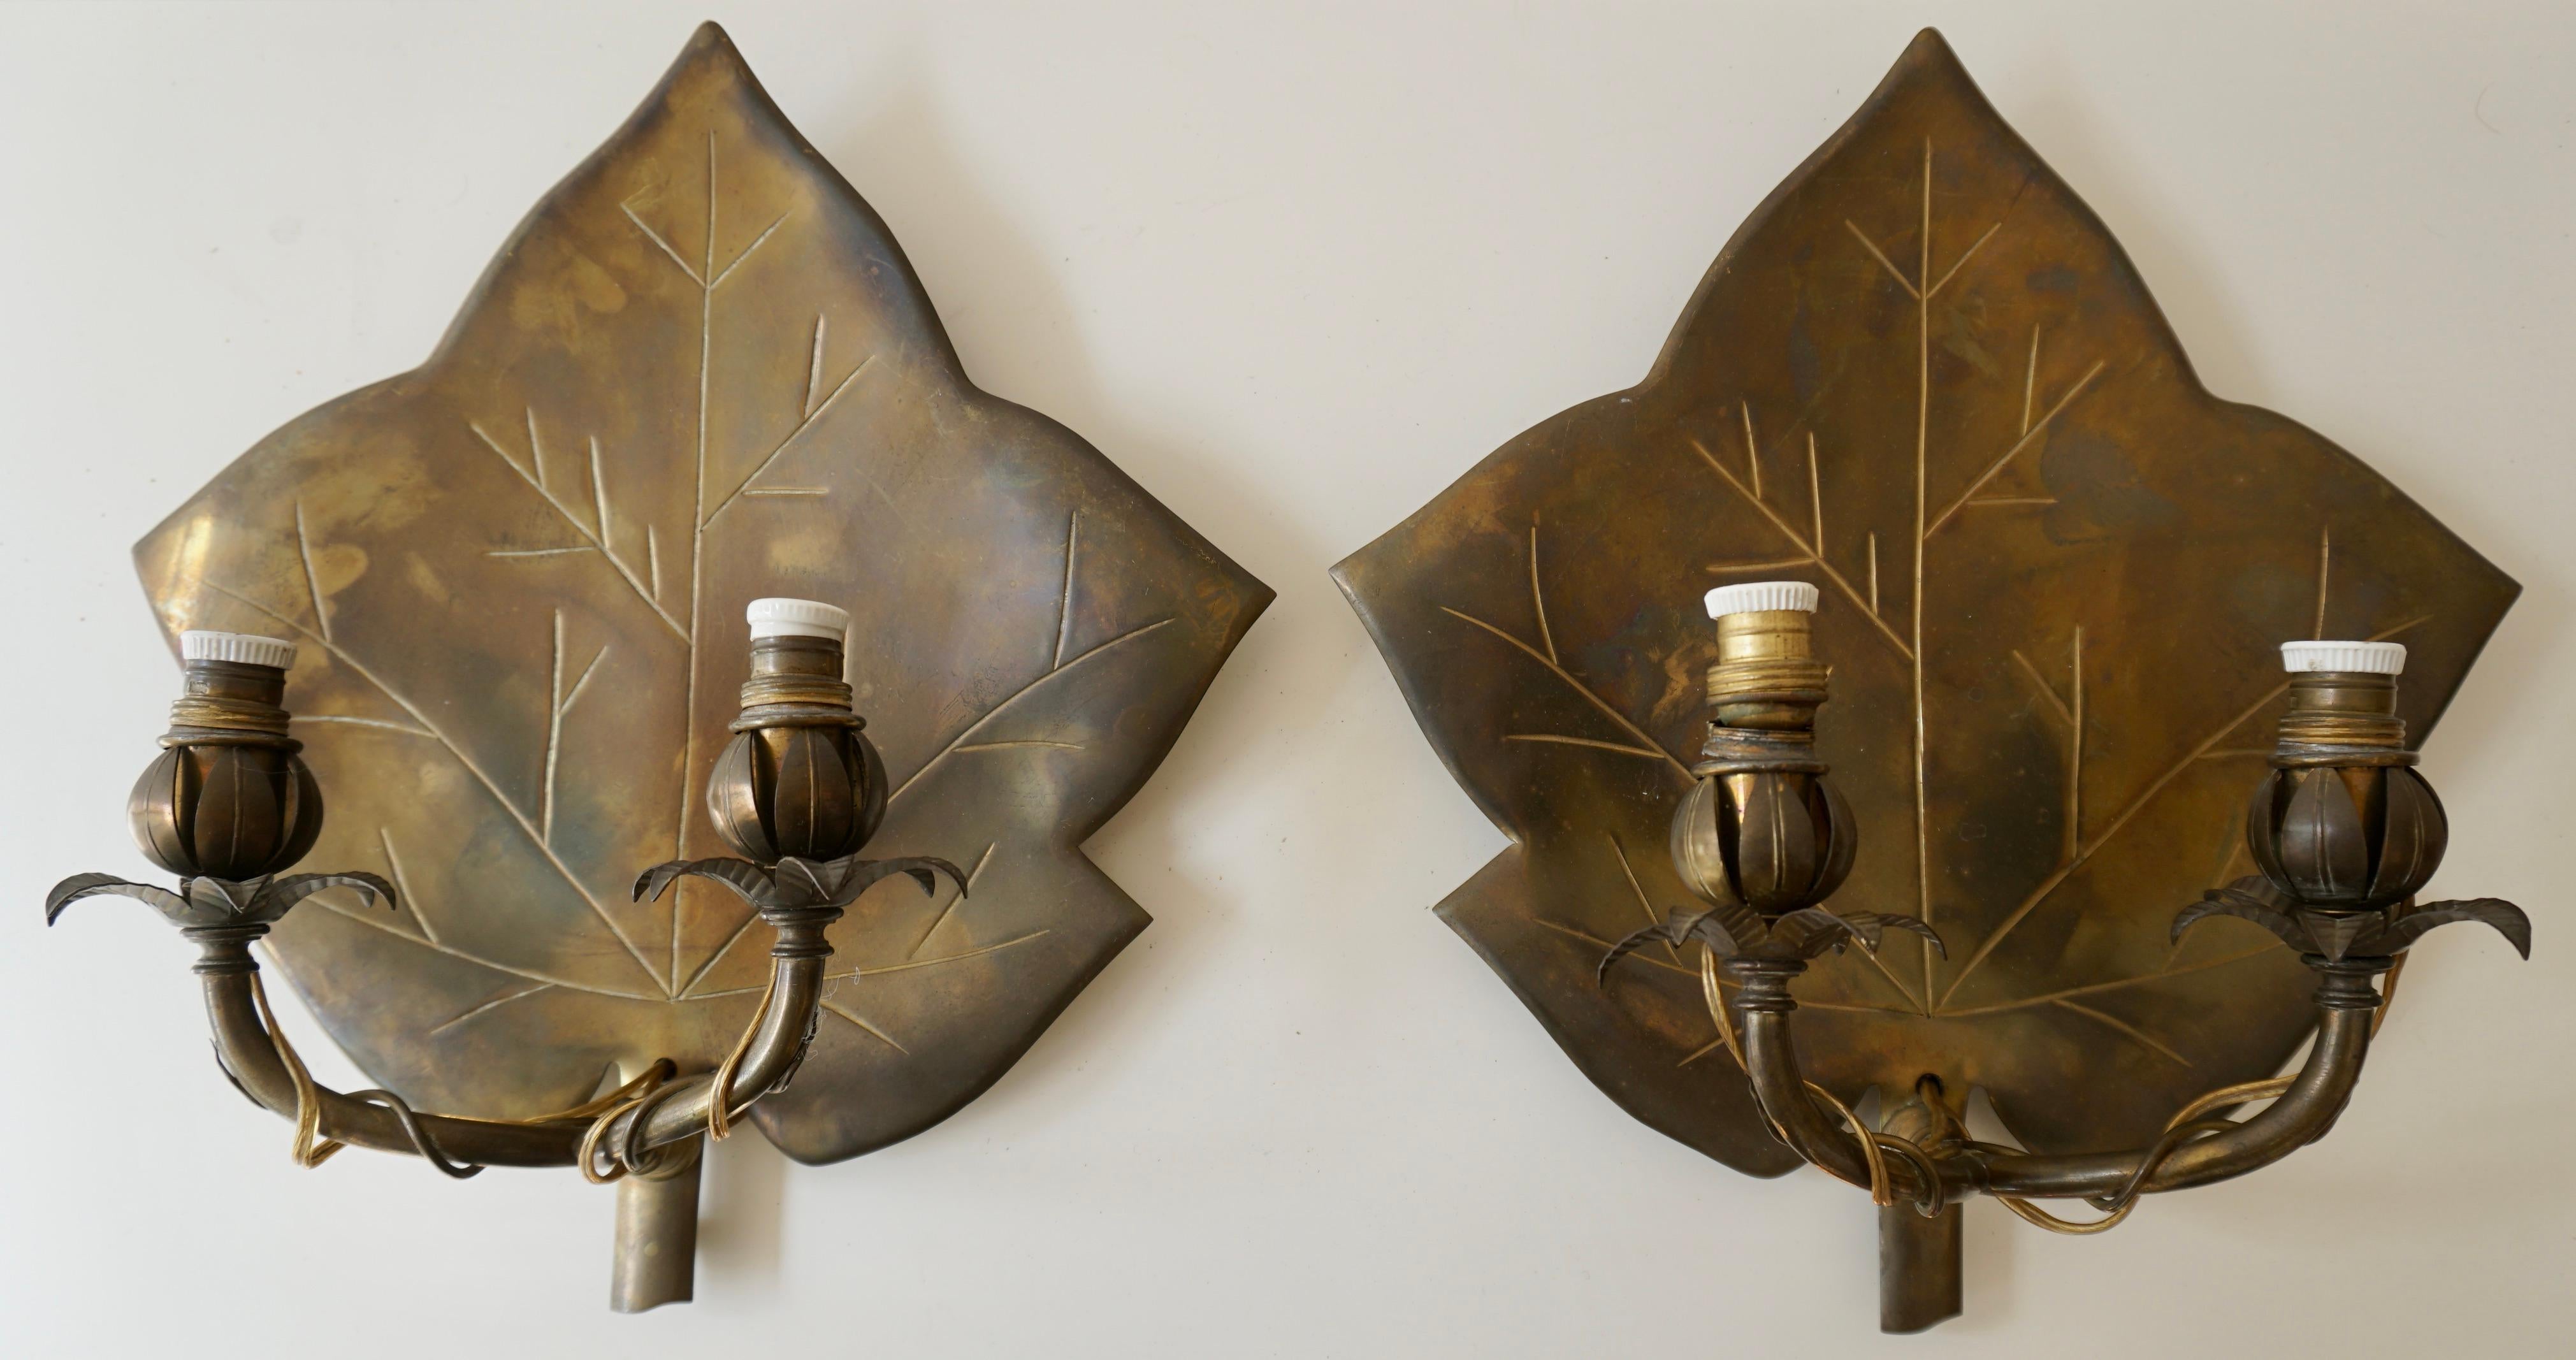 Wall sconces, per pair, first half 20th century.
Brass wall sconces in the shape of leaves. Two curved candle arms for one lamp each. 



